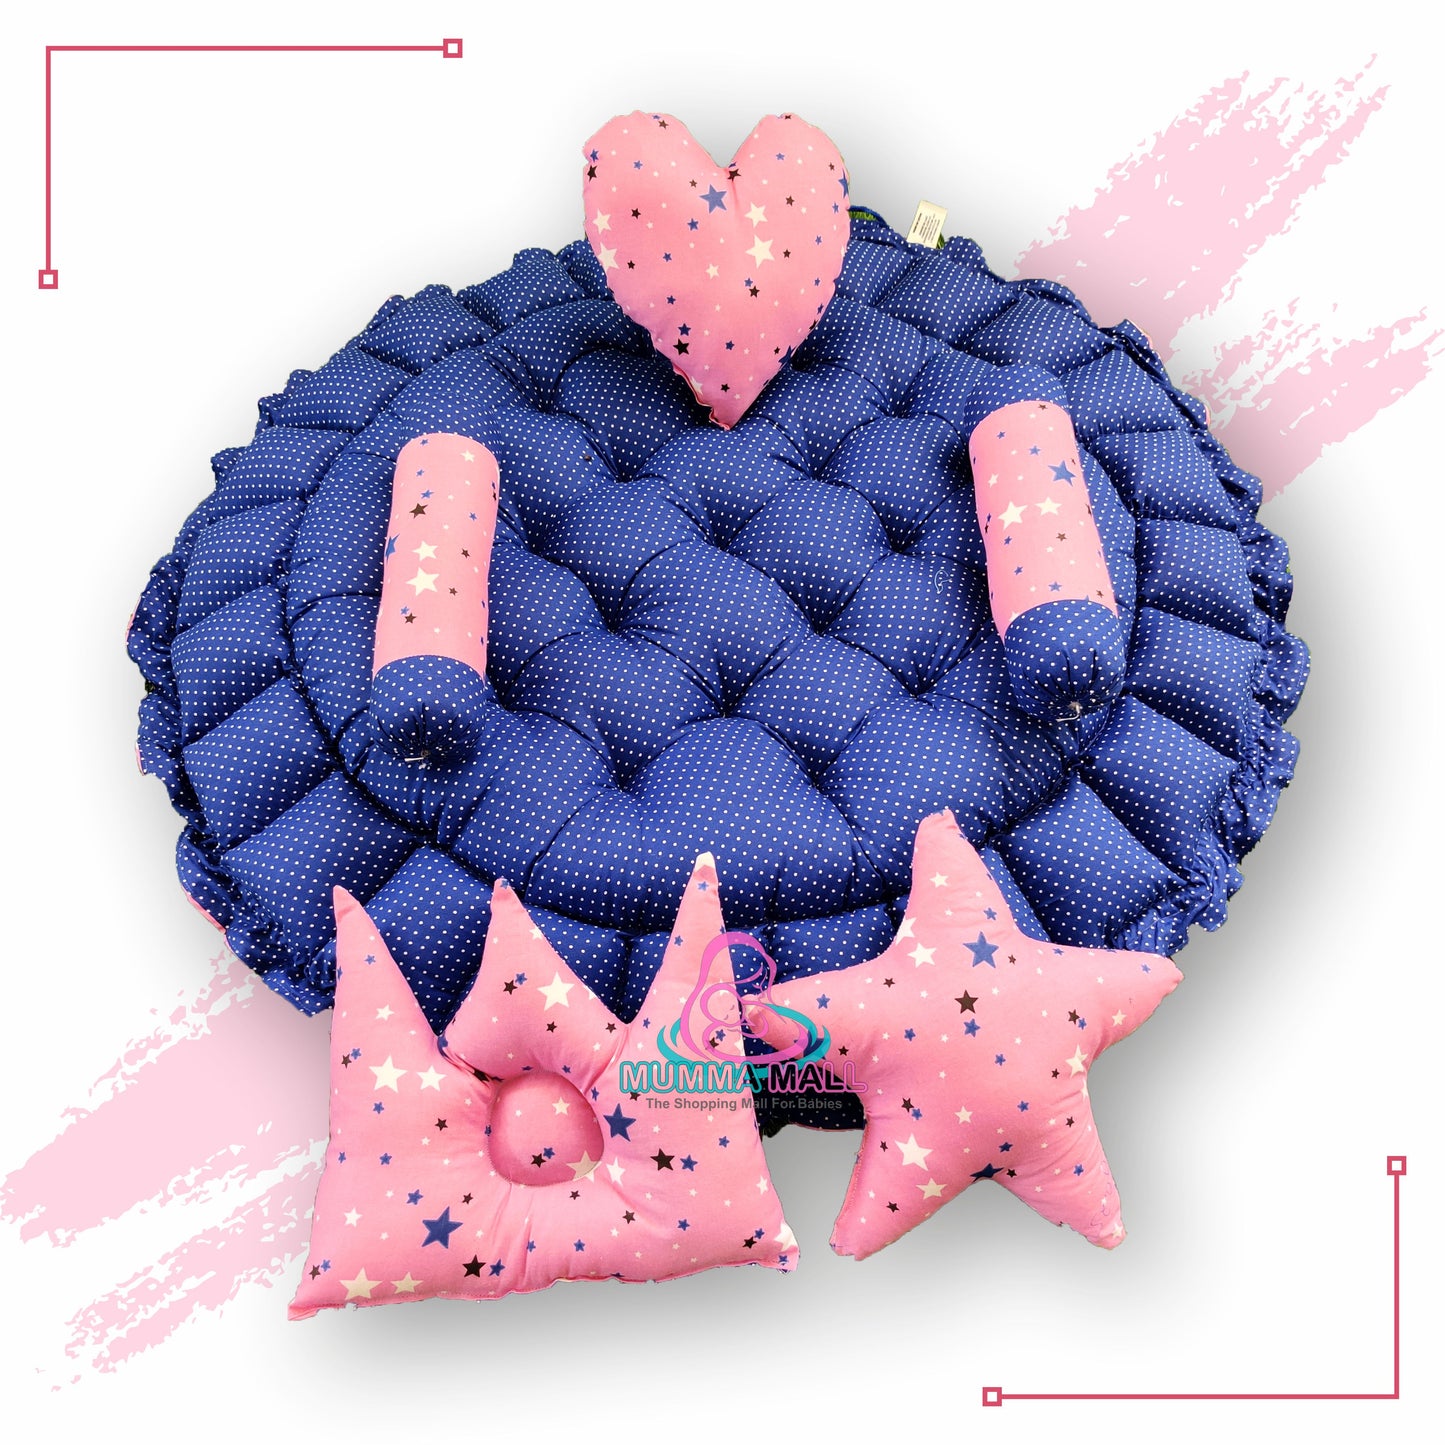 Round baby tub bed with set of 5 pillows as neck support, side support and toy (Pink and Blue)